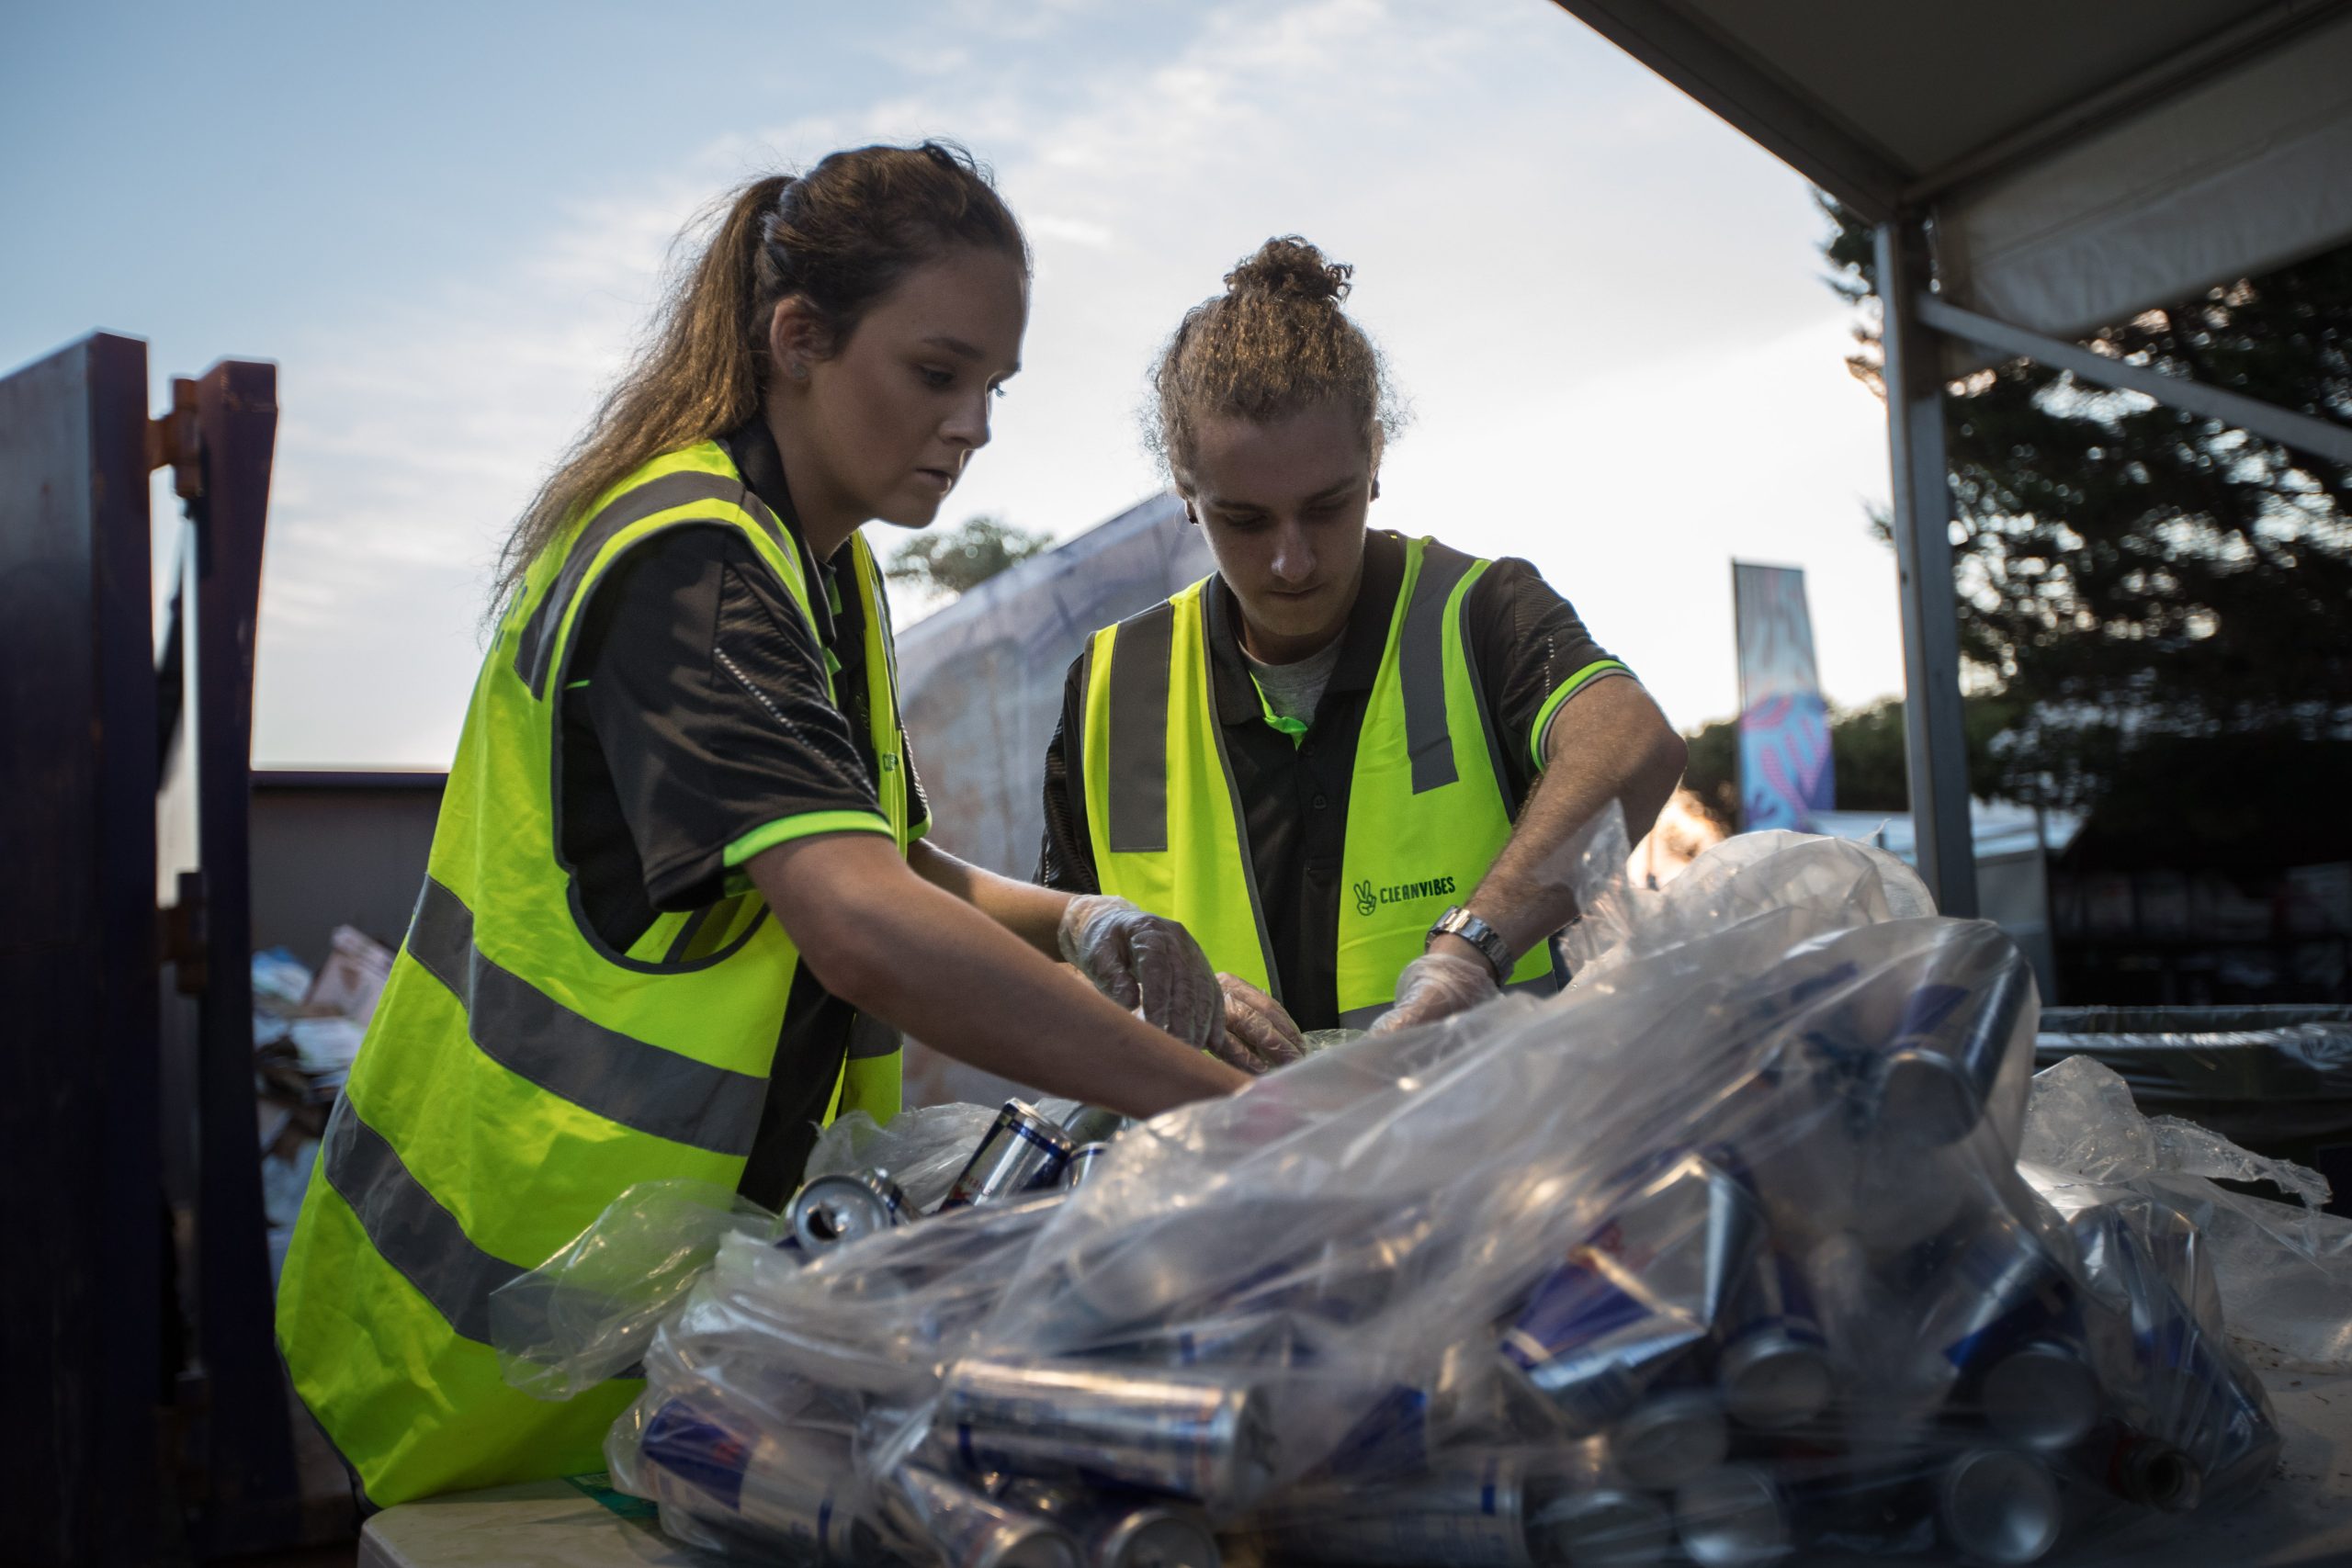 New partnership aims to reduce waste and environmental impact of our festivals